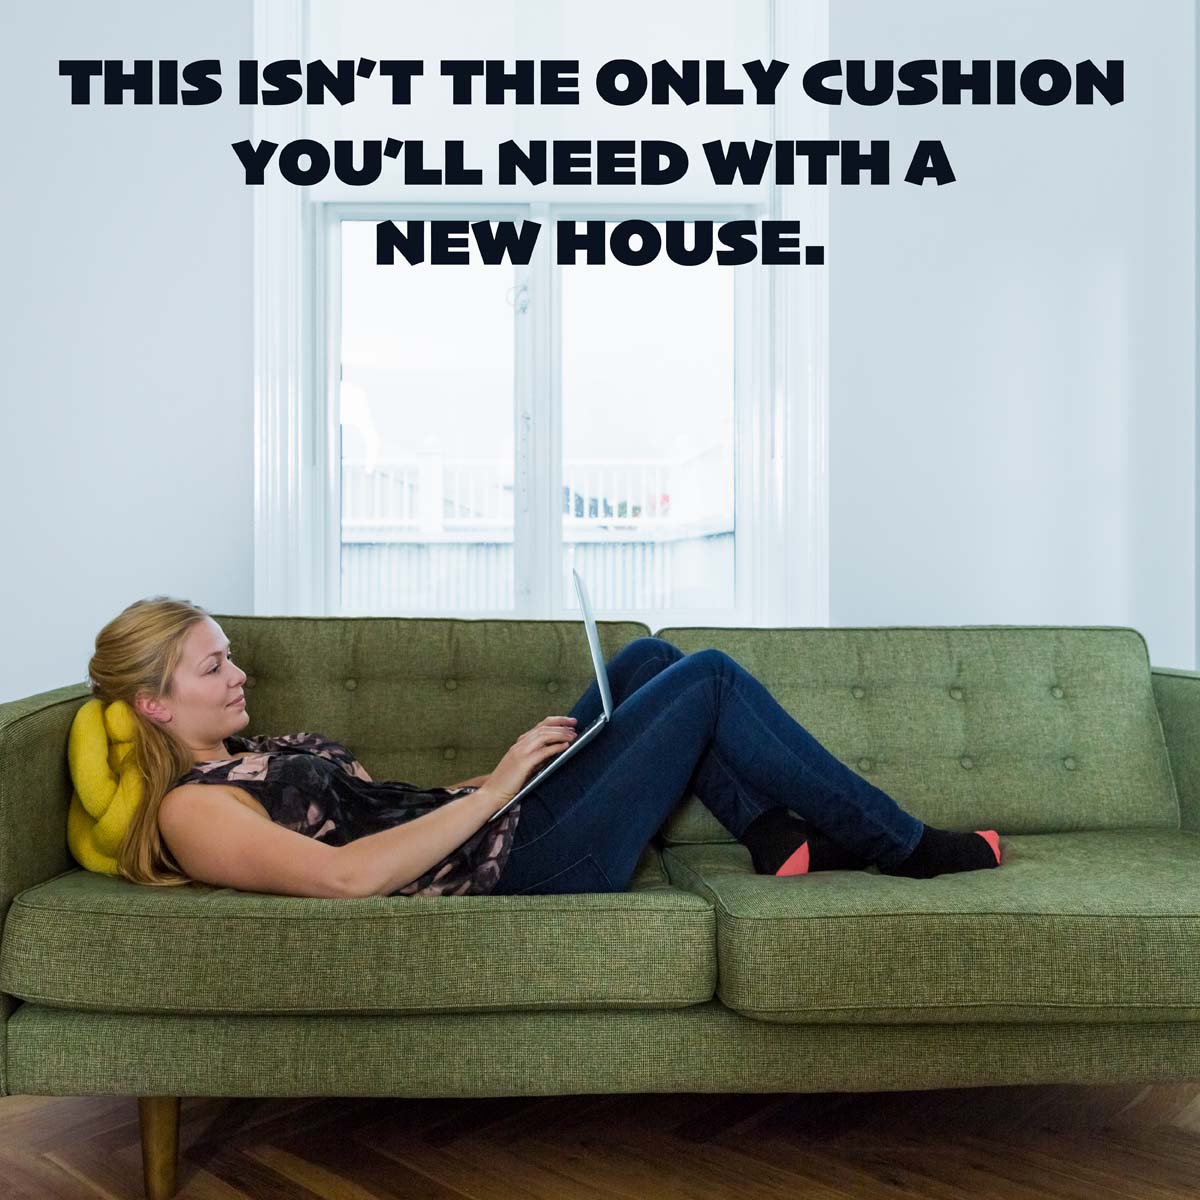 First-time homebuyer? A down payment won’t be your only expense! Make sure you have a cushion for moving expenses and homebuyer closing costs. Closing costs typically average 3-6% of the purchase price. 

#homebuyingtips #phillyrealestate #sandiegorealestate #newjerseyrealestate